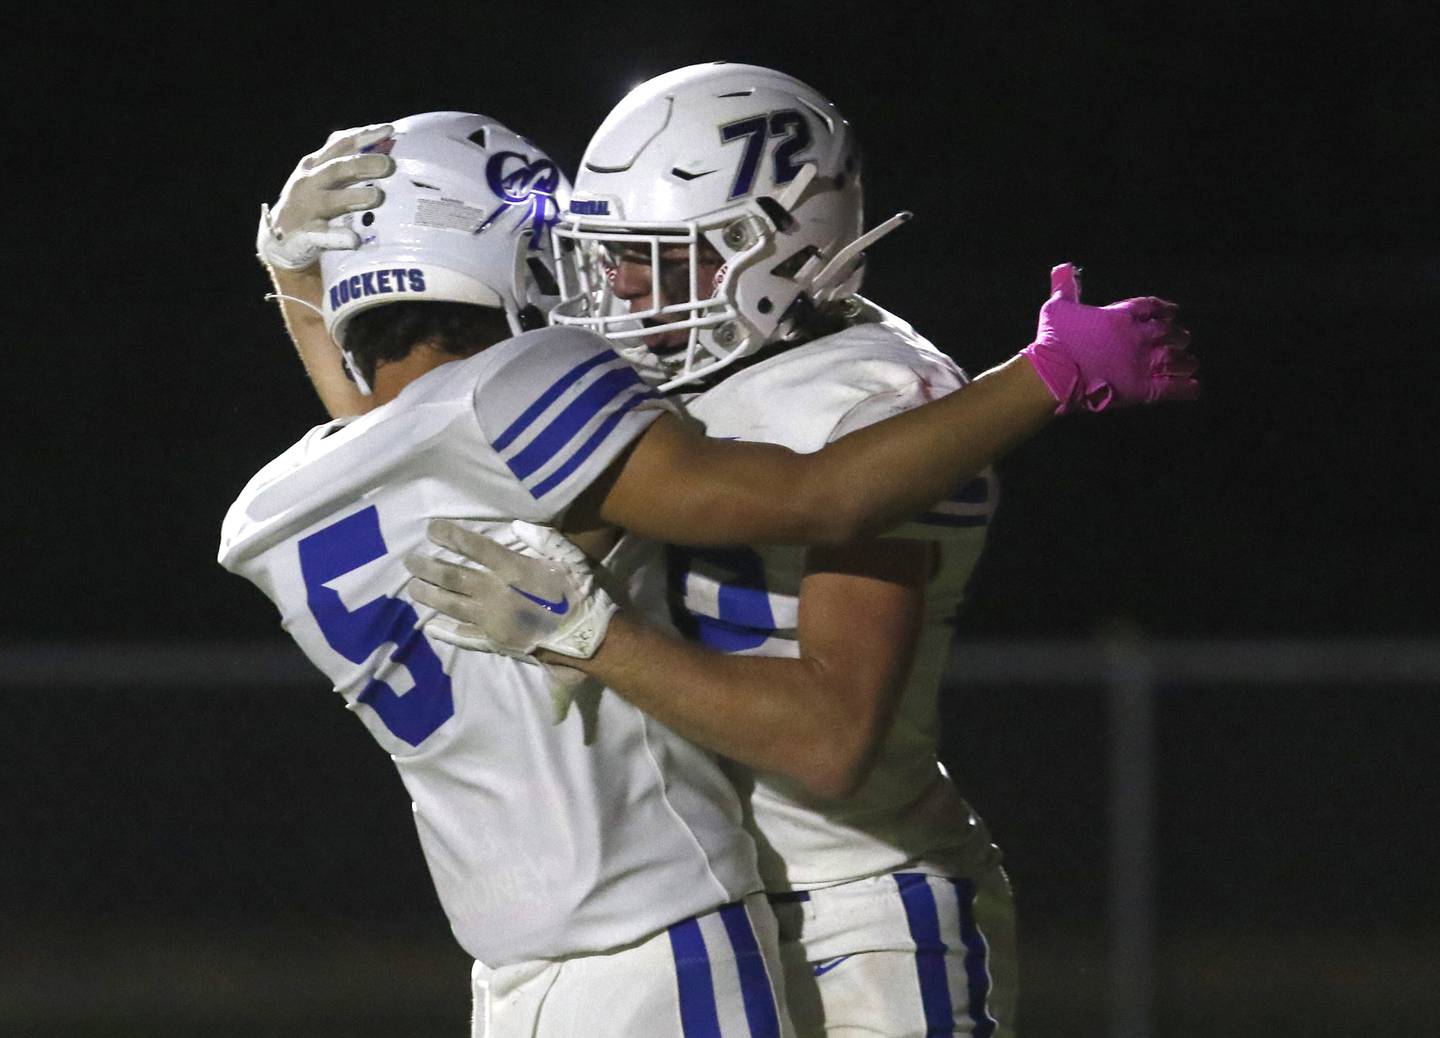 Burlington Central's Lucas Kerr celebrates with Burlington Central's Joseph Kowall after Kowall scored a touchdown during a Fox Valley Conference football game against Crystal Lake South on Friday, Sept. 8, 2023, at Crystal Lake South High School.